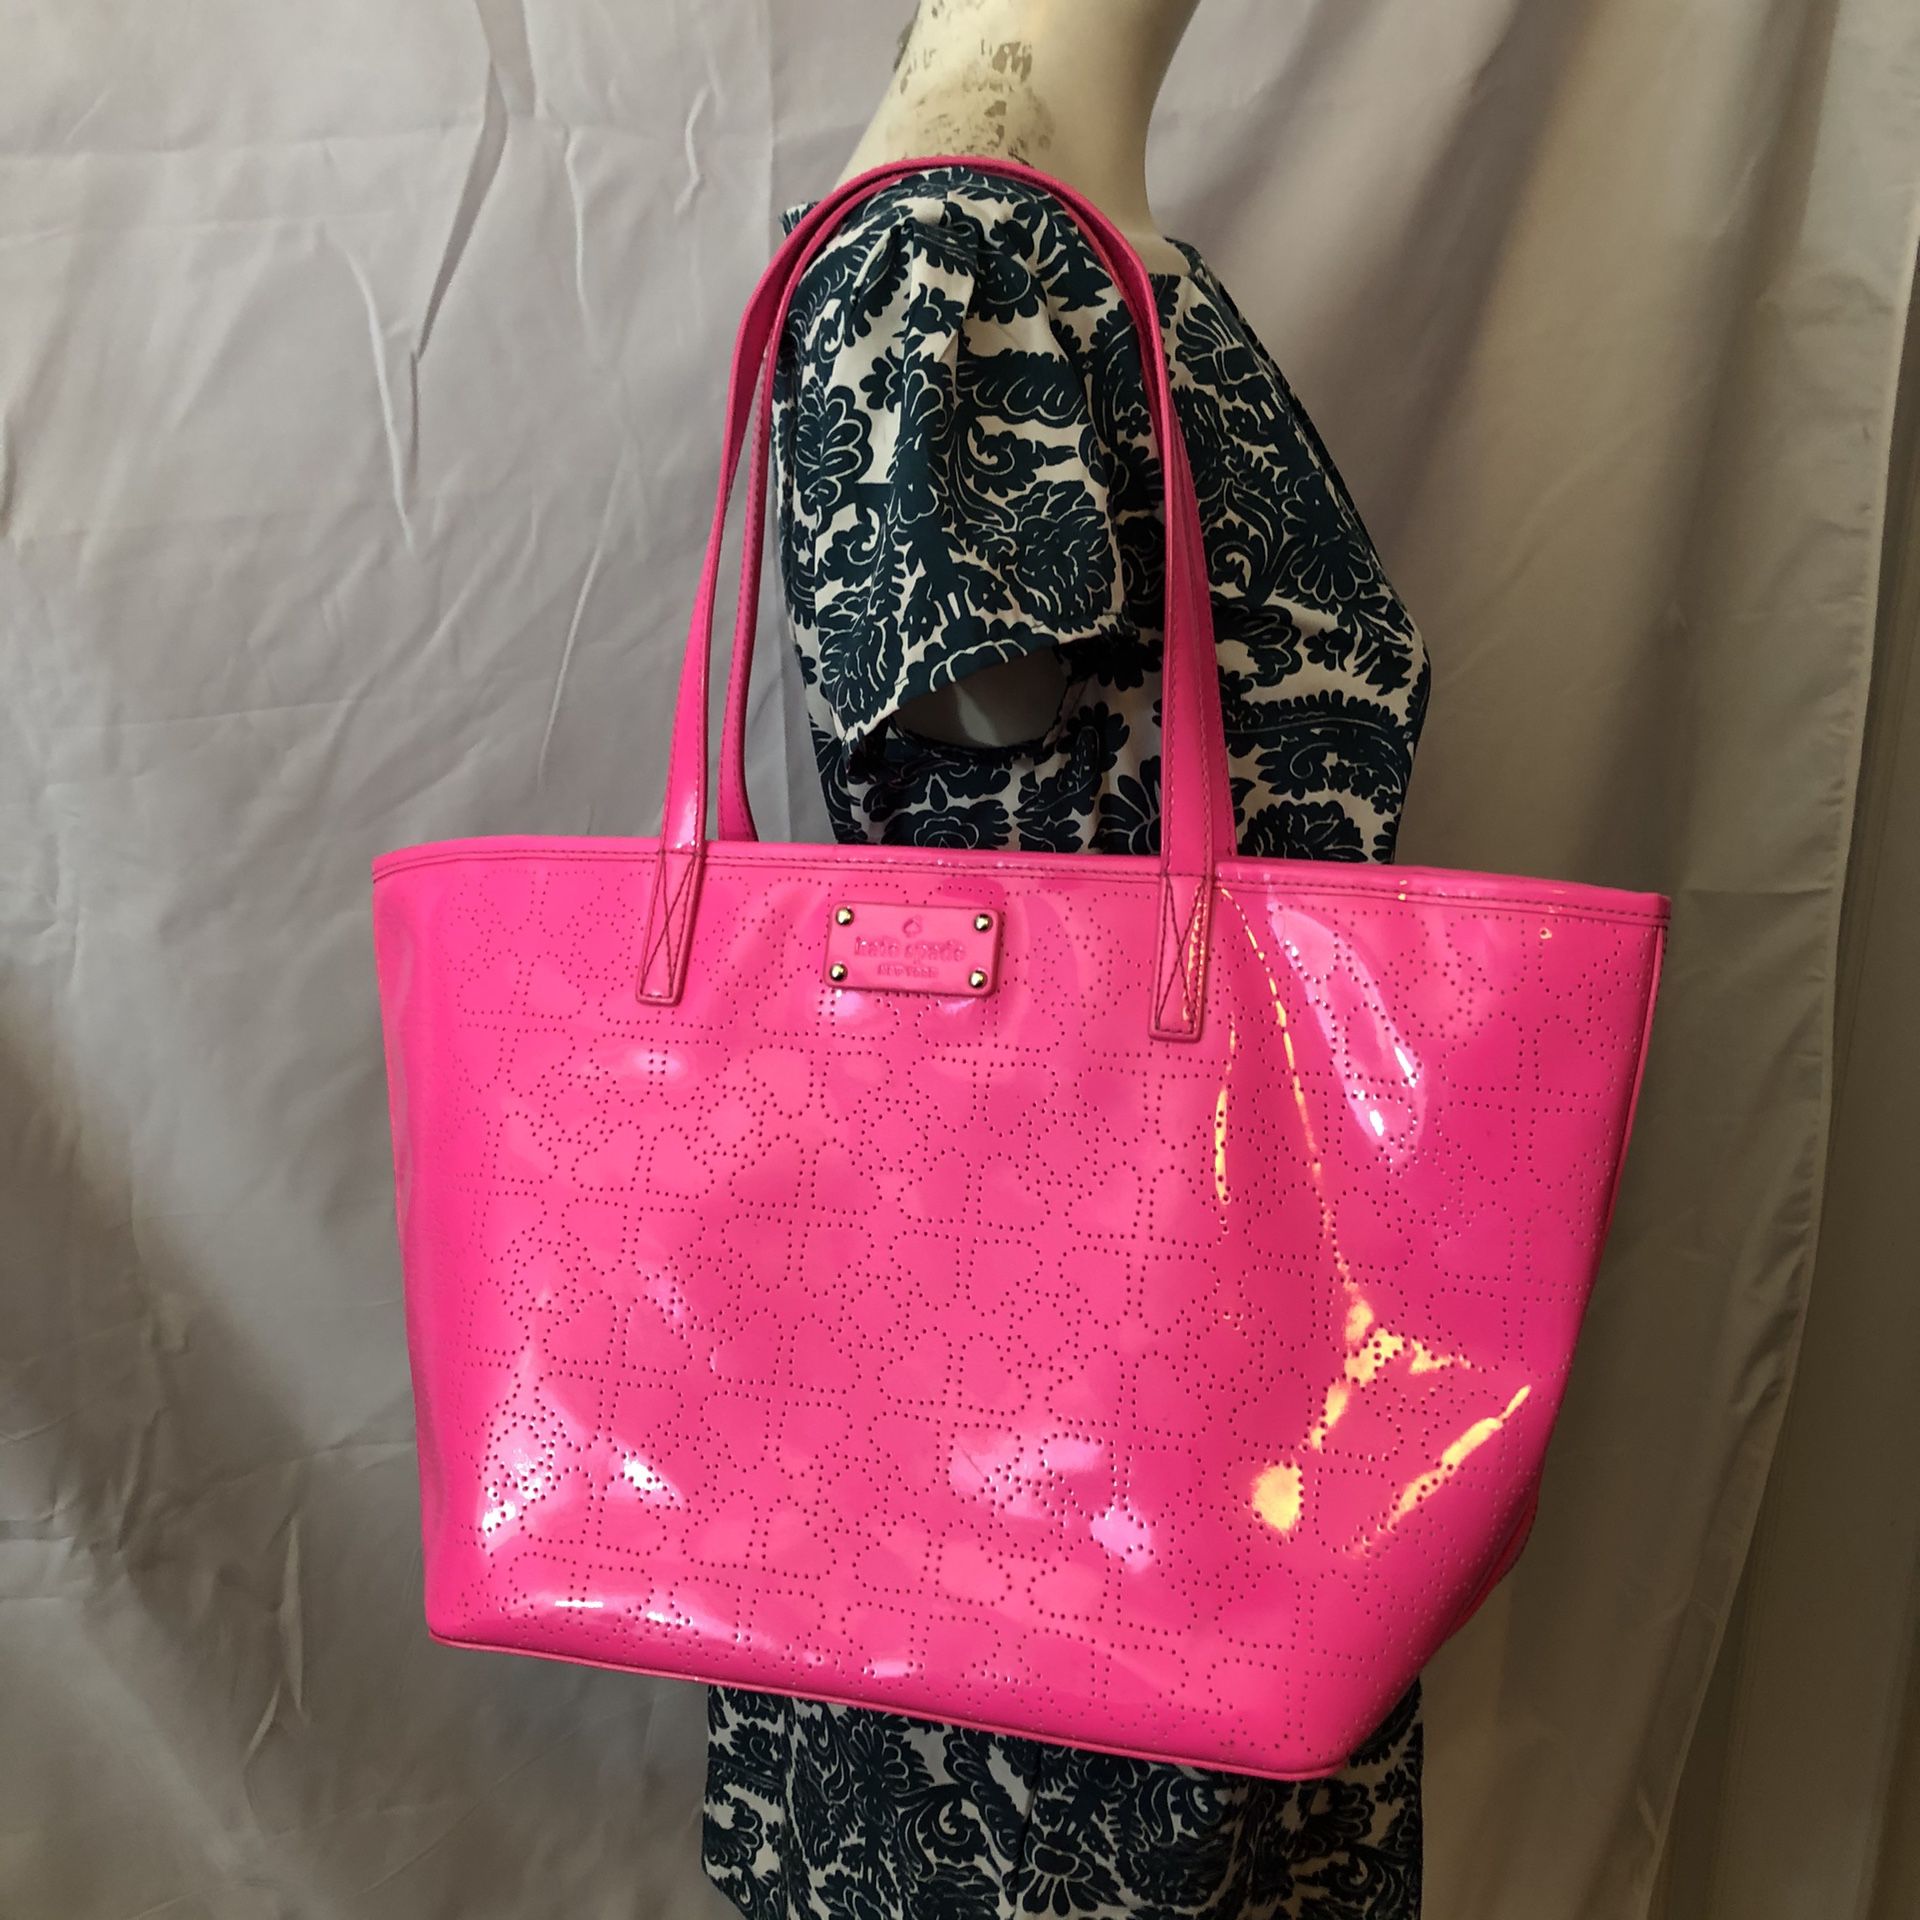 Pink Mini Versace Tote Bag for Sale in New Windsor, NY - OfferUp